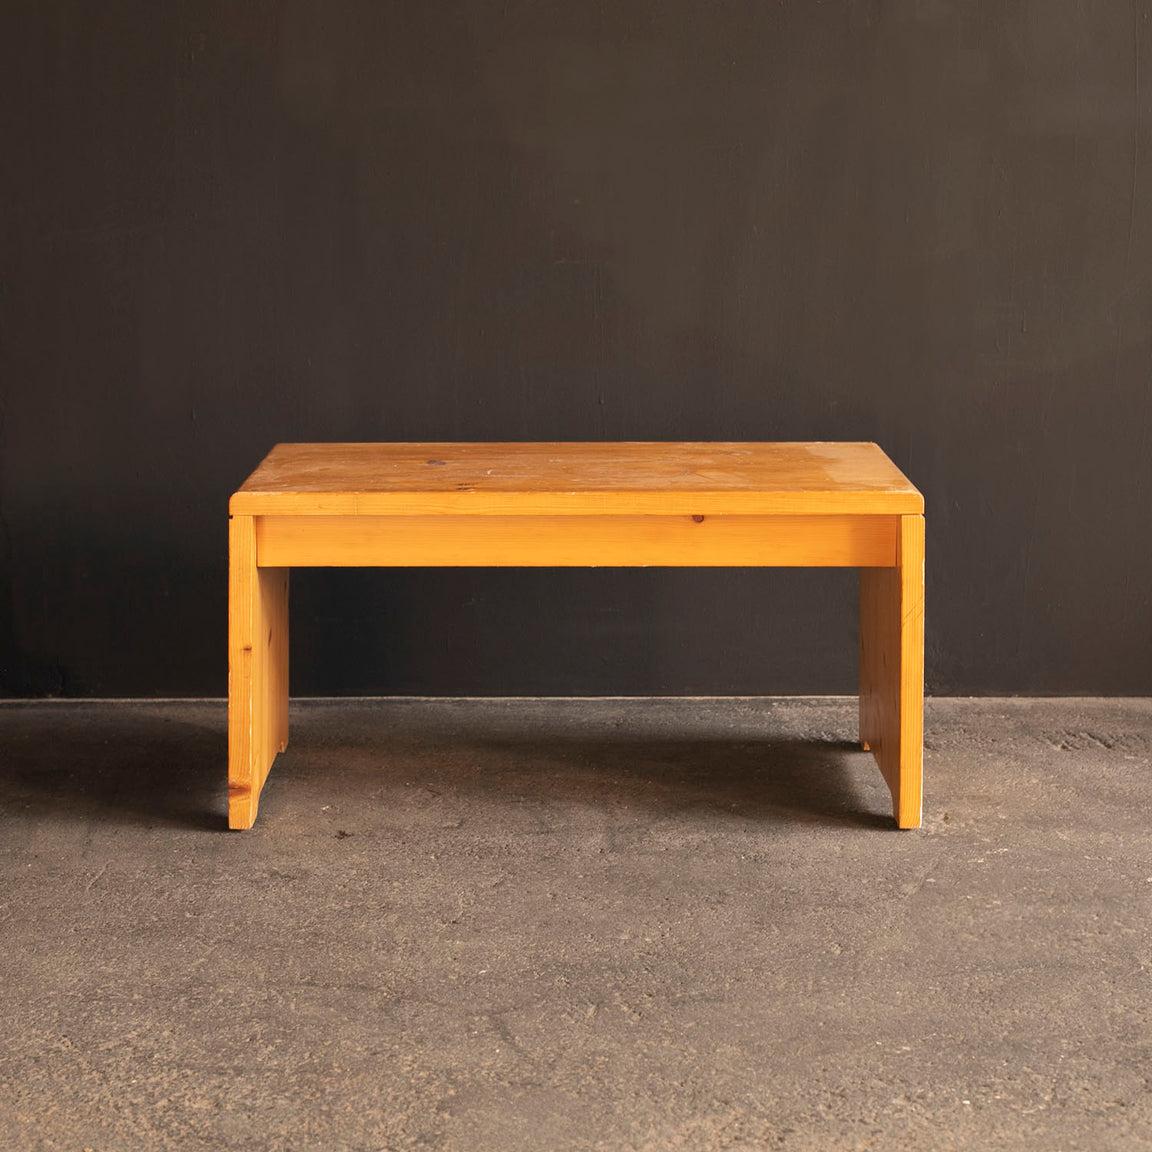 French Low Table/ Bench from Les Arc 1600, France